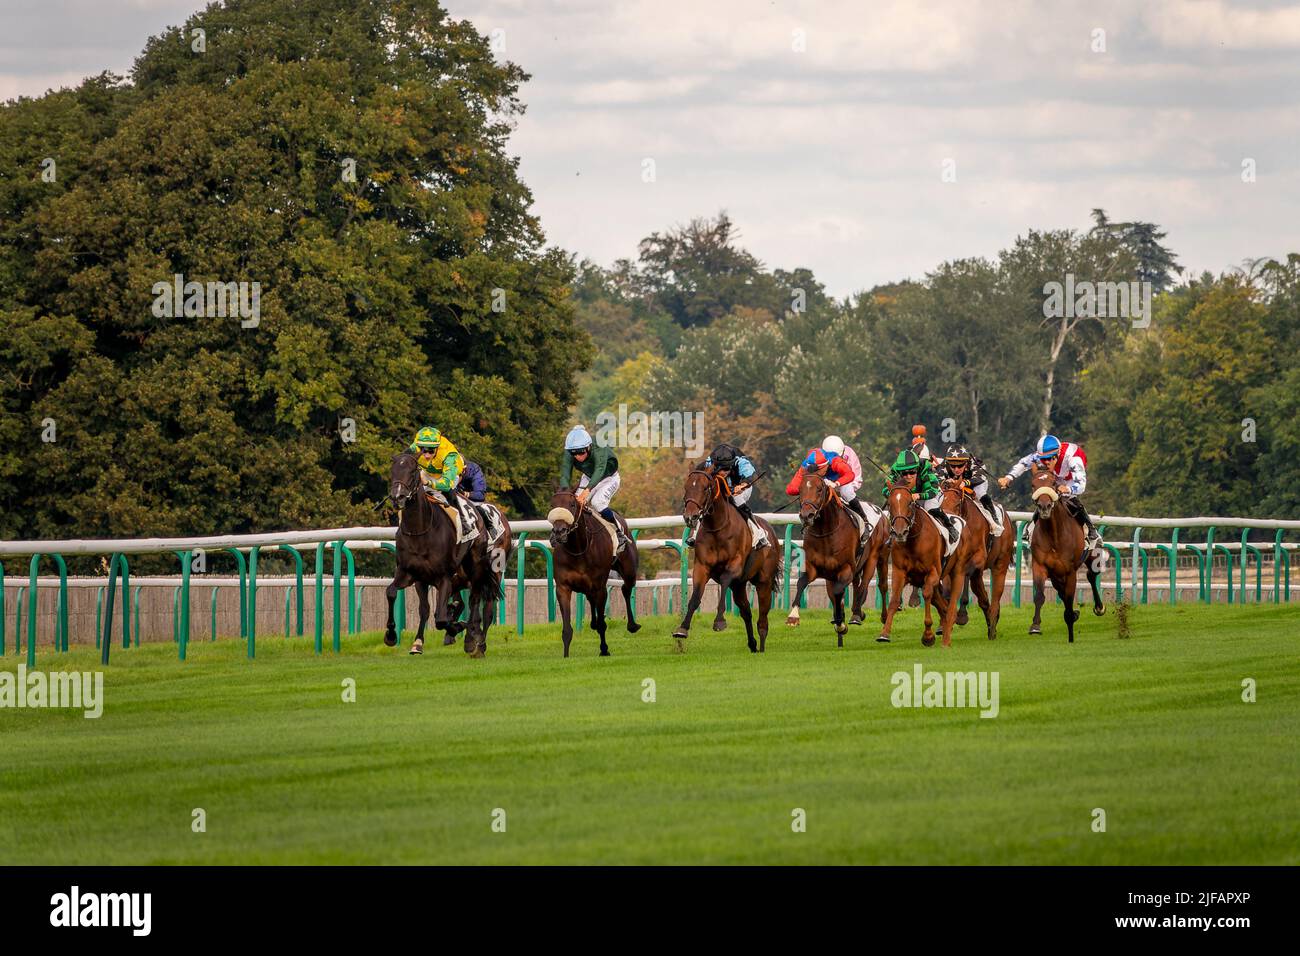 Close up of horses and jockey riders on the racetrack at Chantilly, France Stock Photo